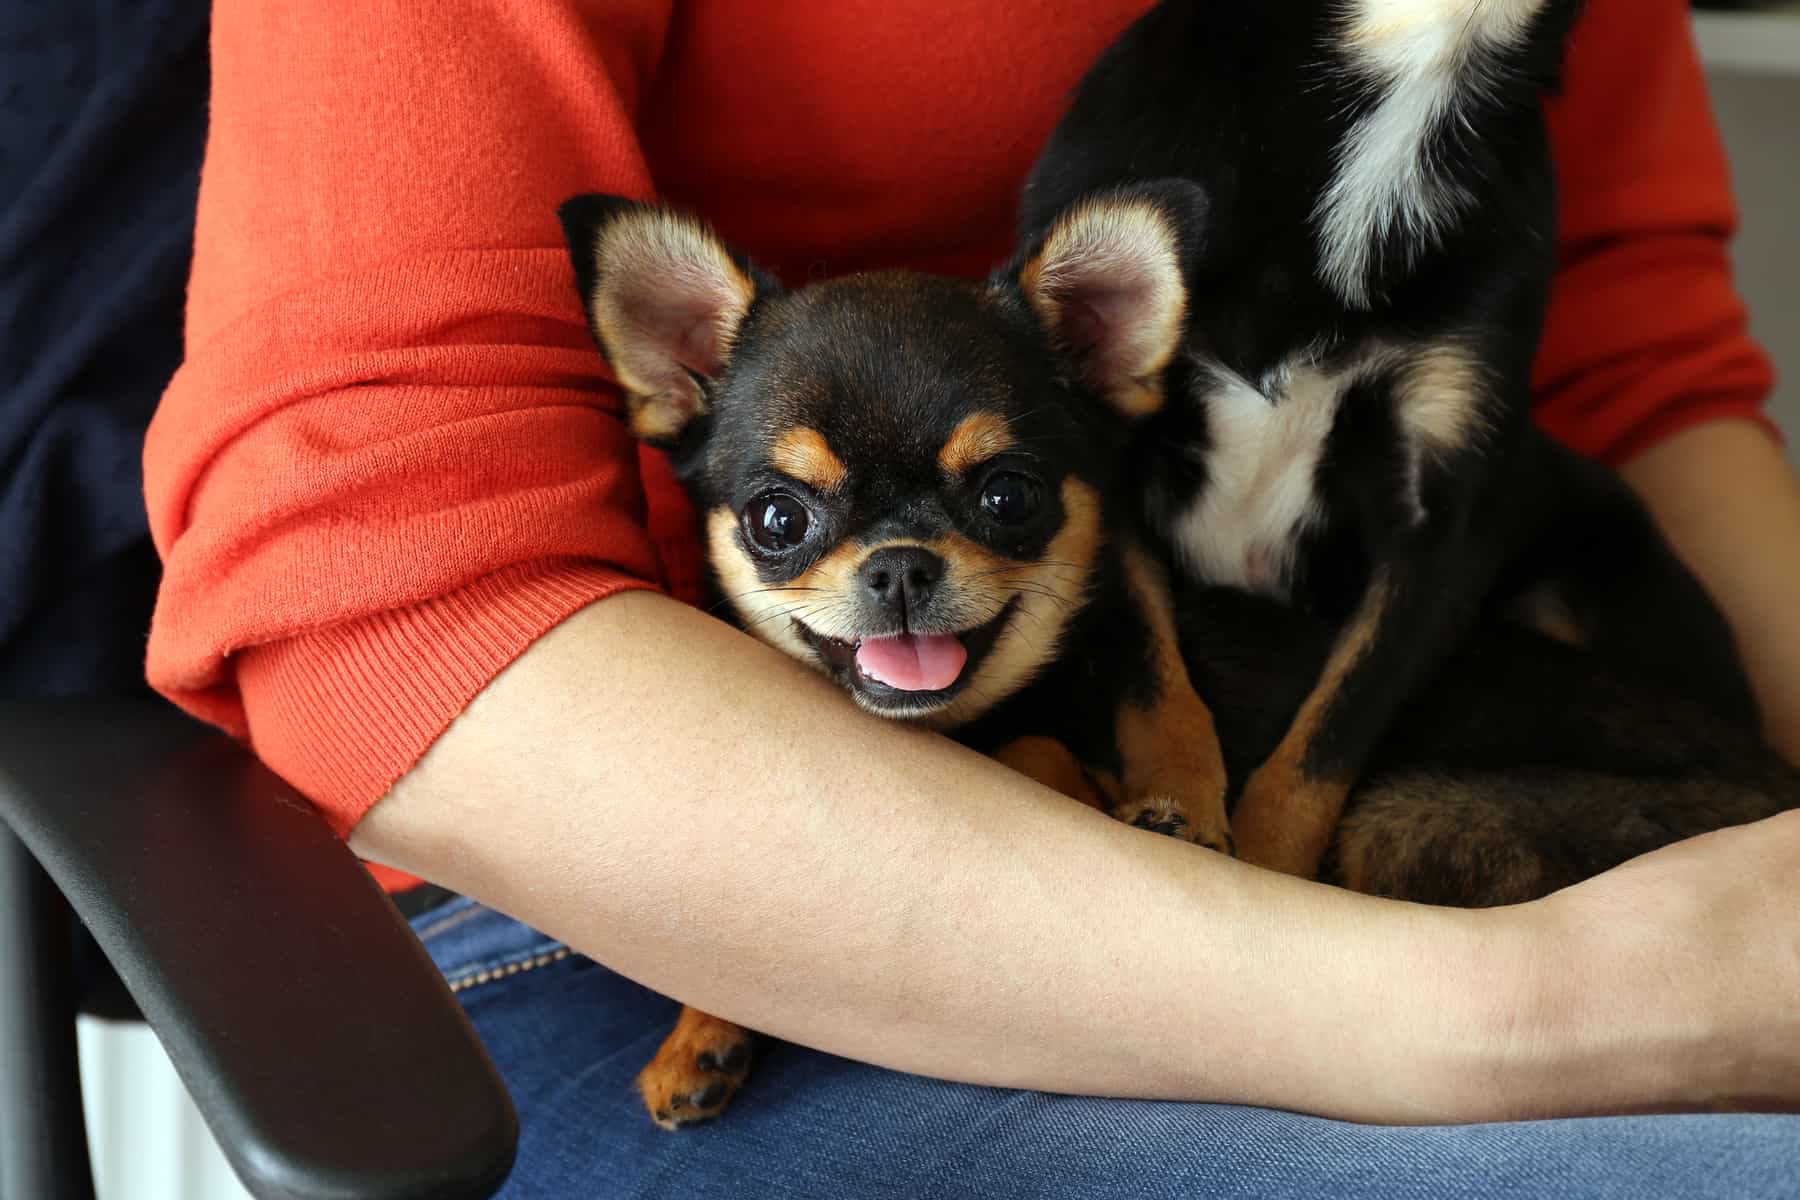 close-up photo of a Chihuahua puppy on a female person's lap